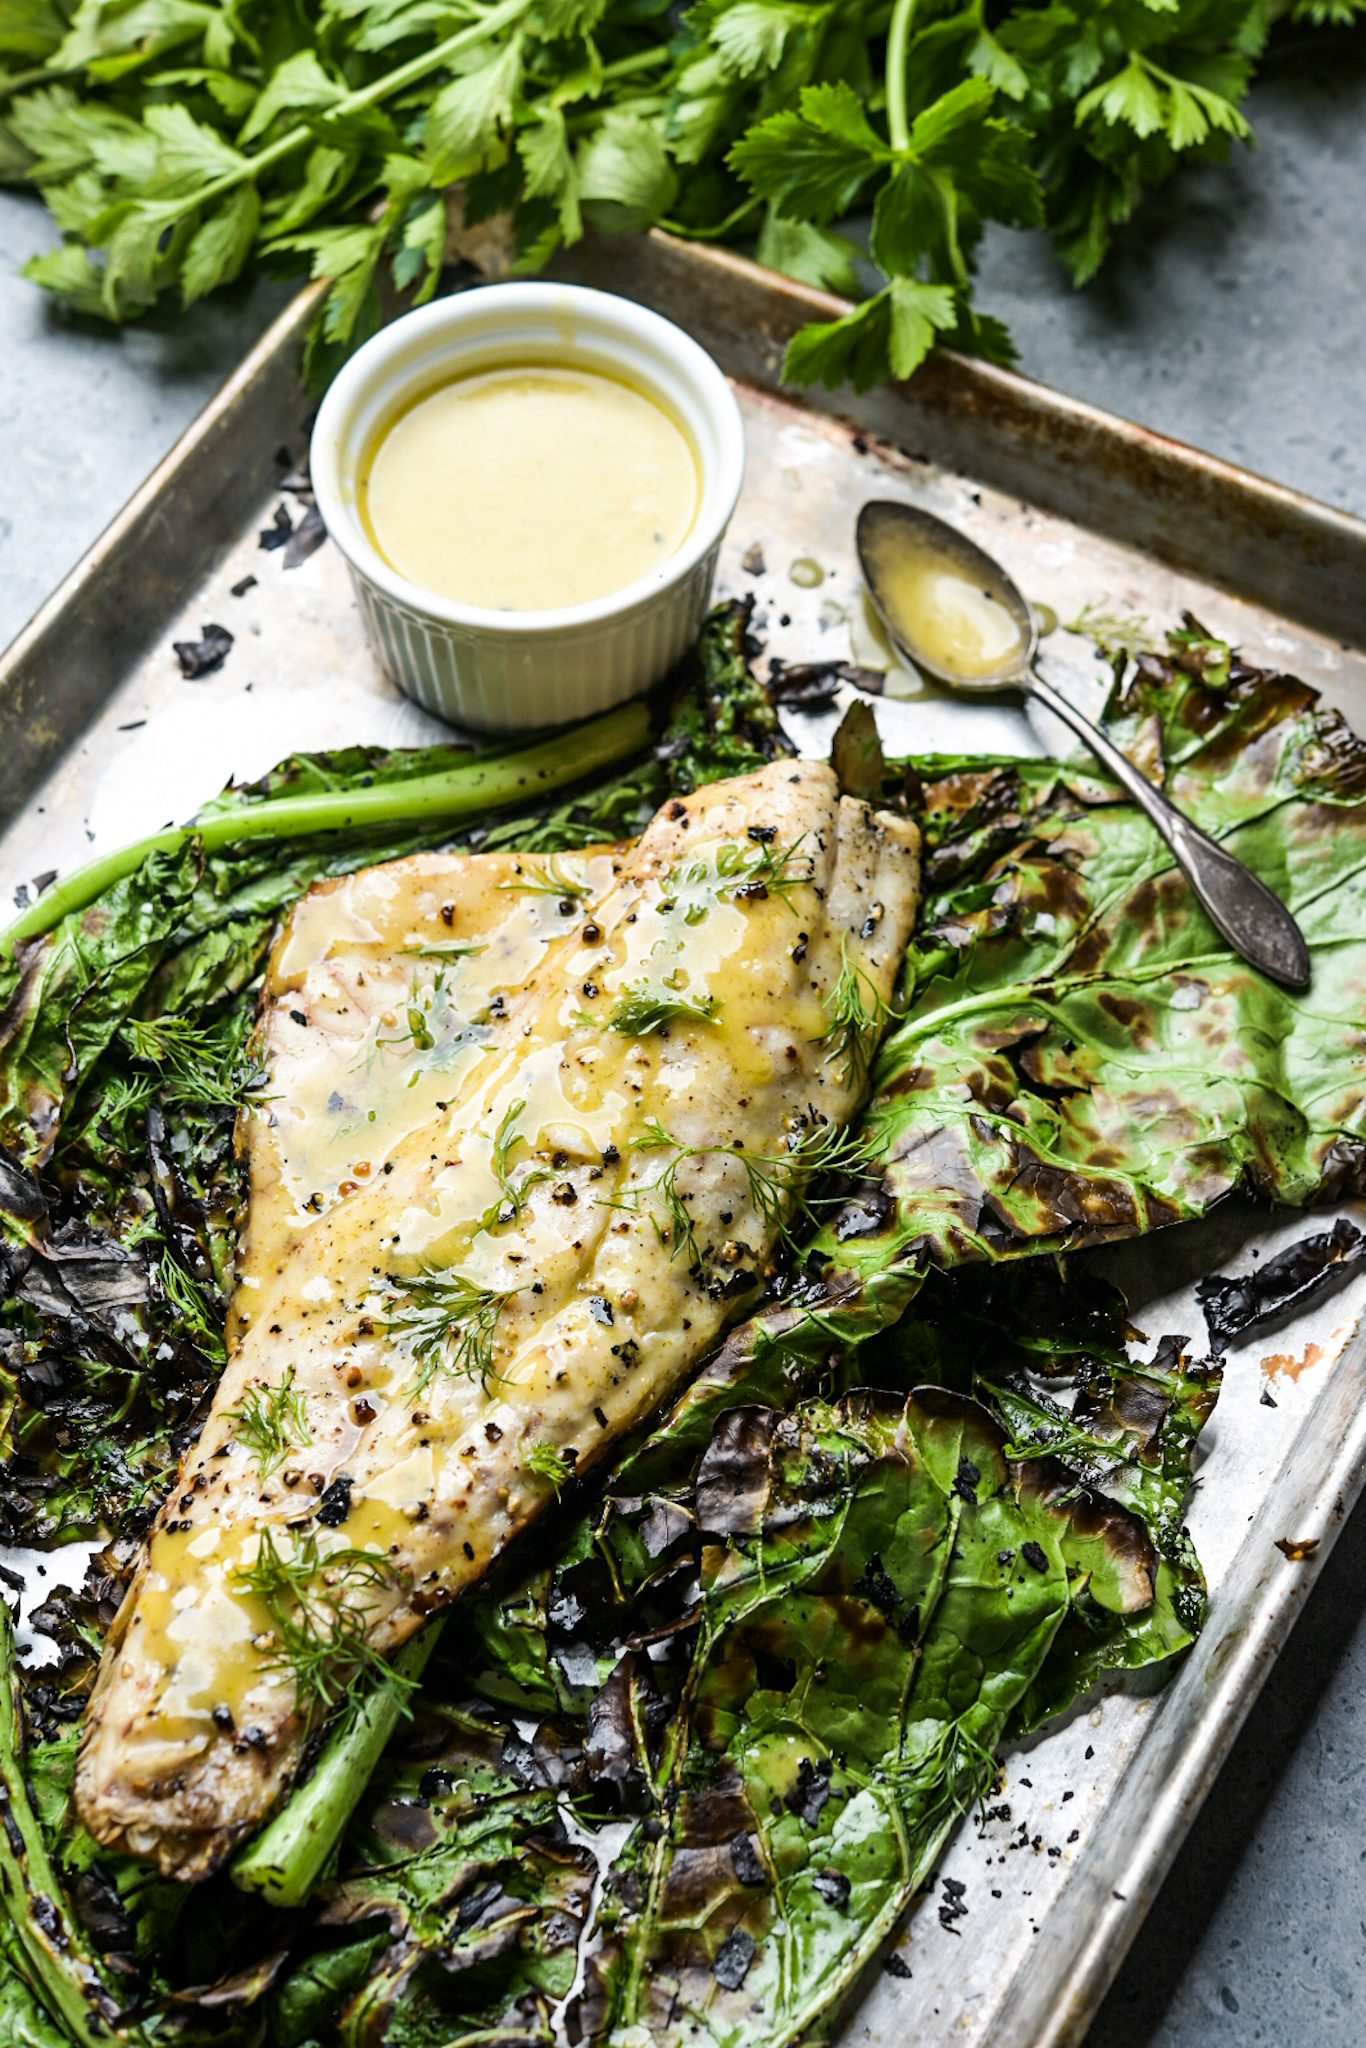 Grilled redfish with charred collards and dill